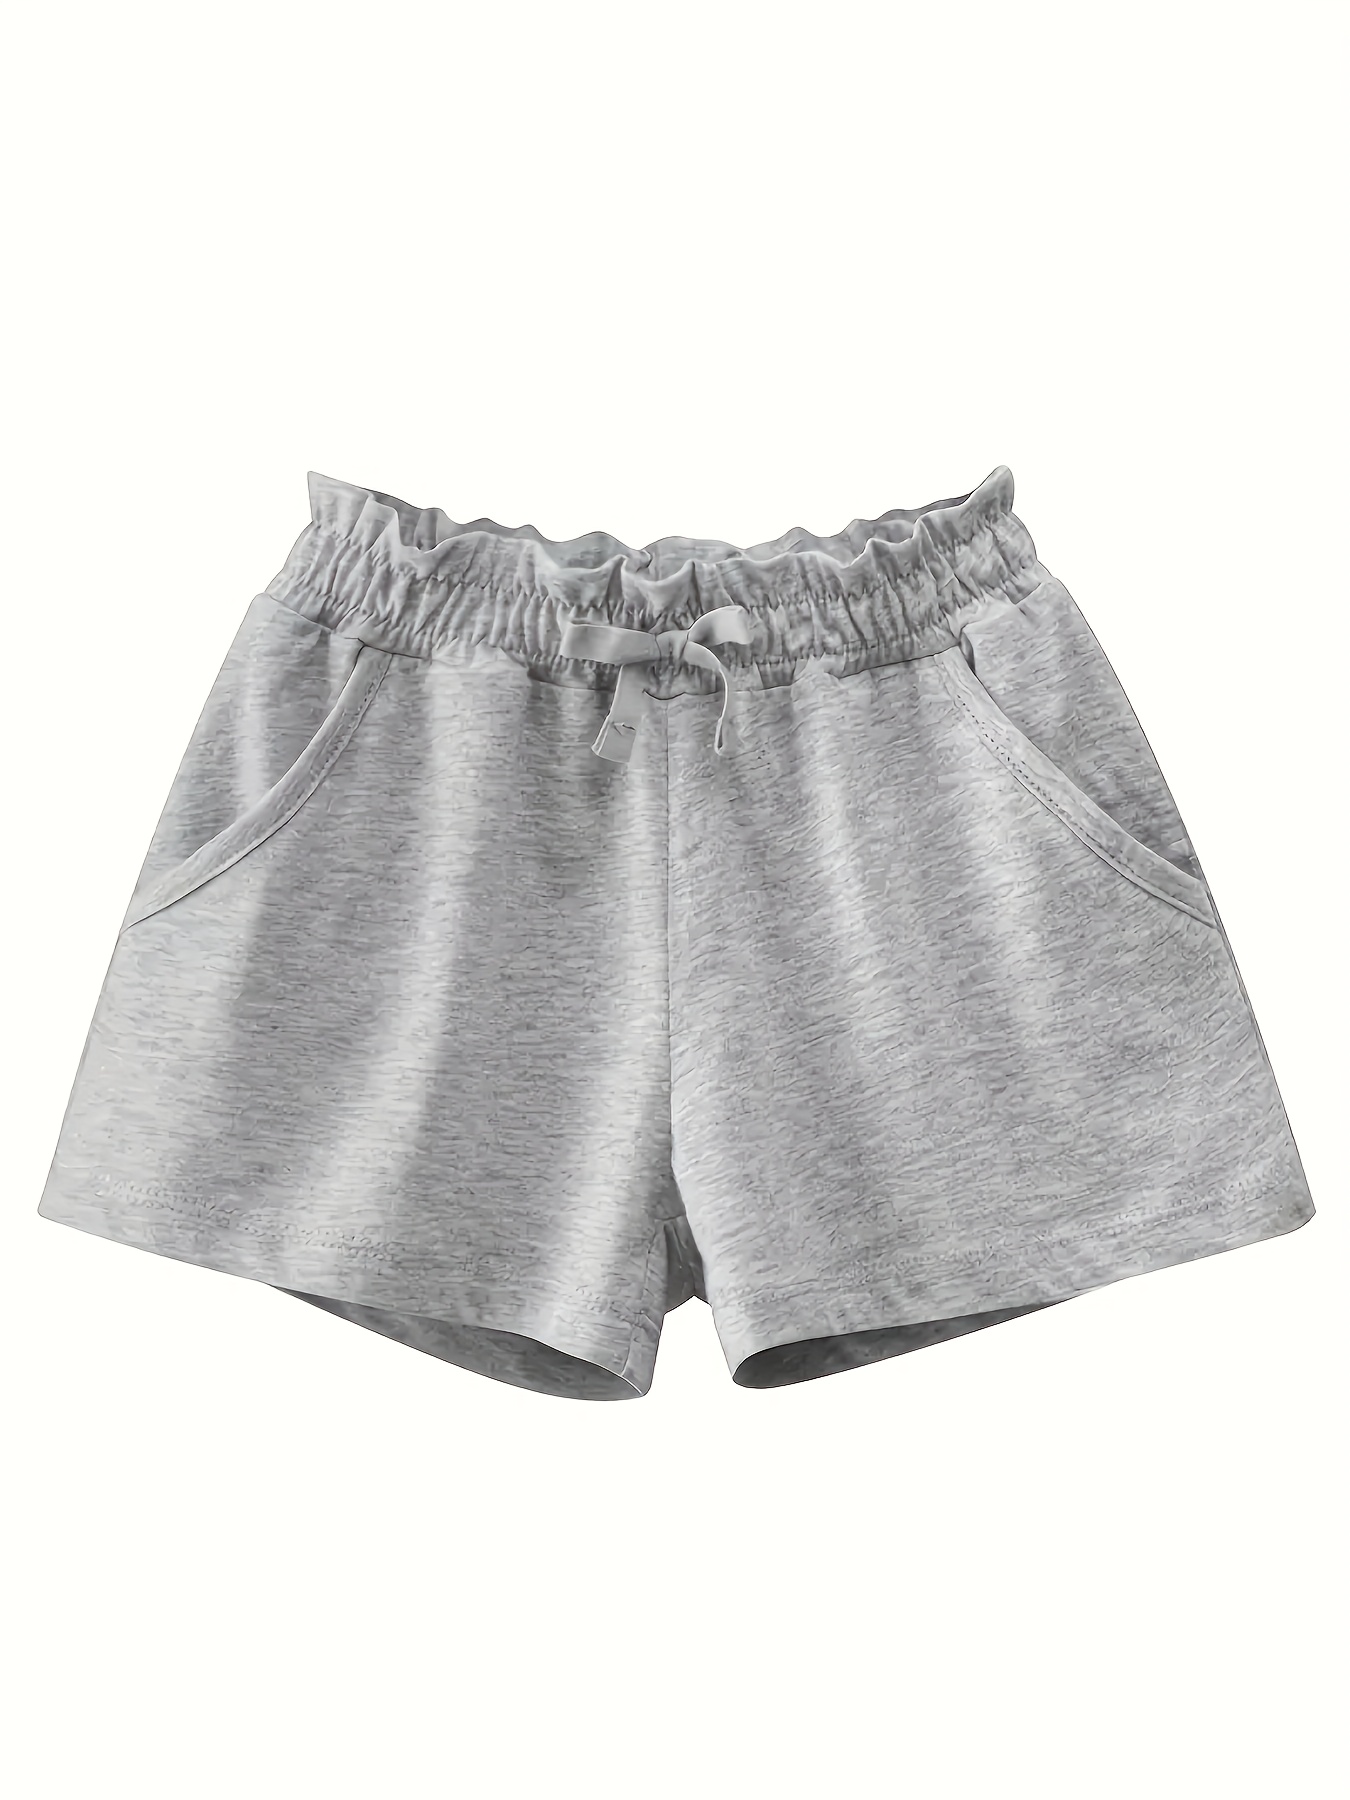 Girls Basic Cotton Shorts, Solid Color Summer Casual Shorts, Comfortable And Soft